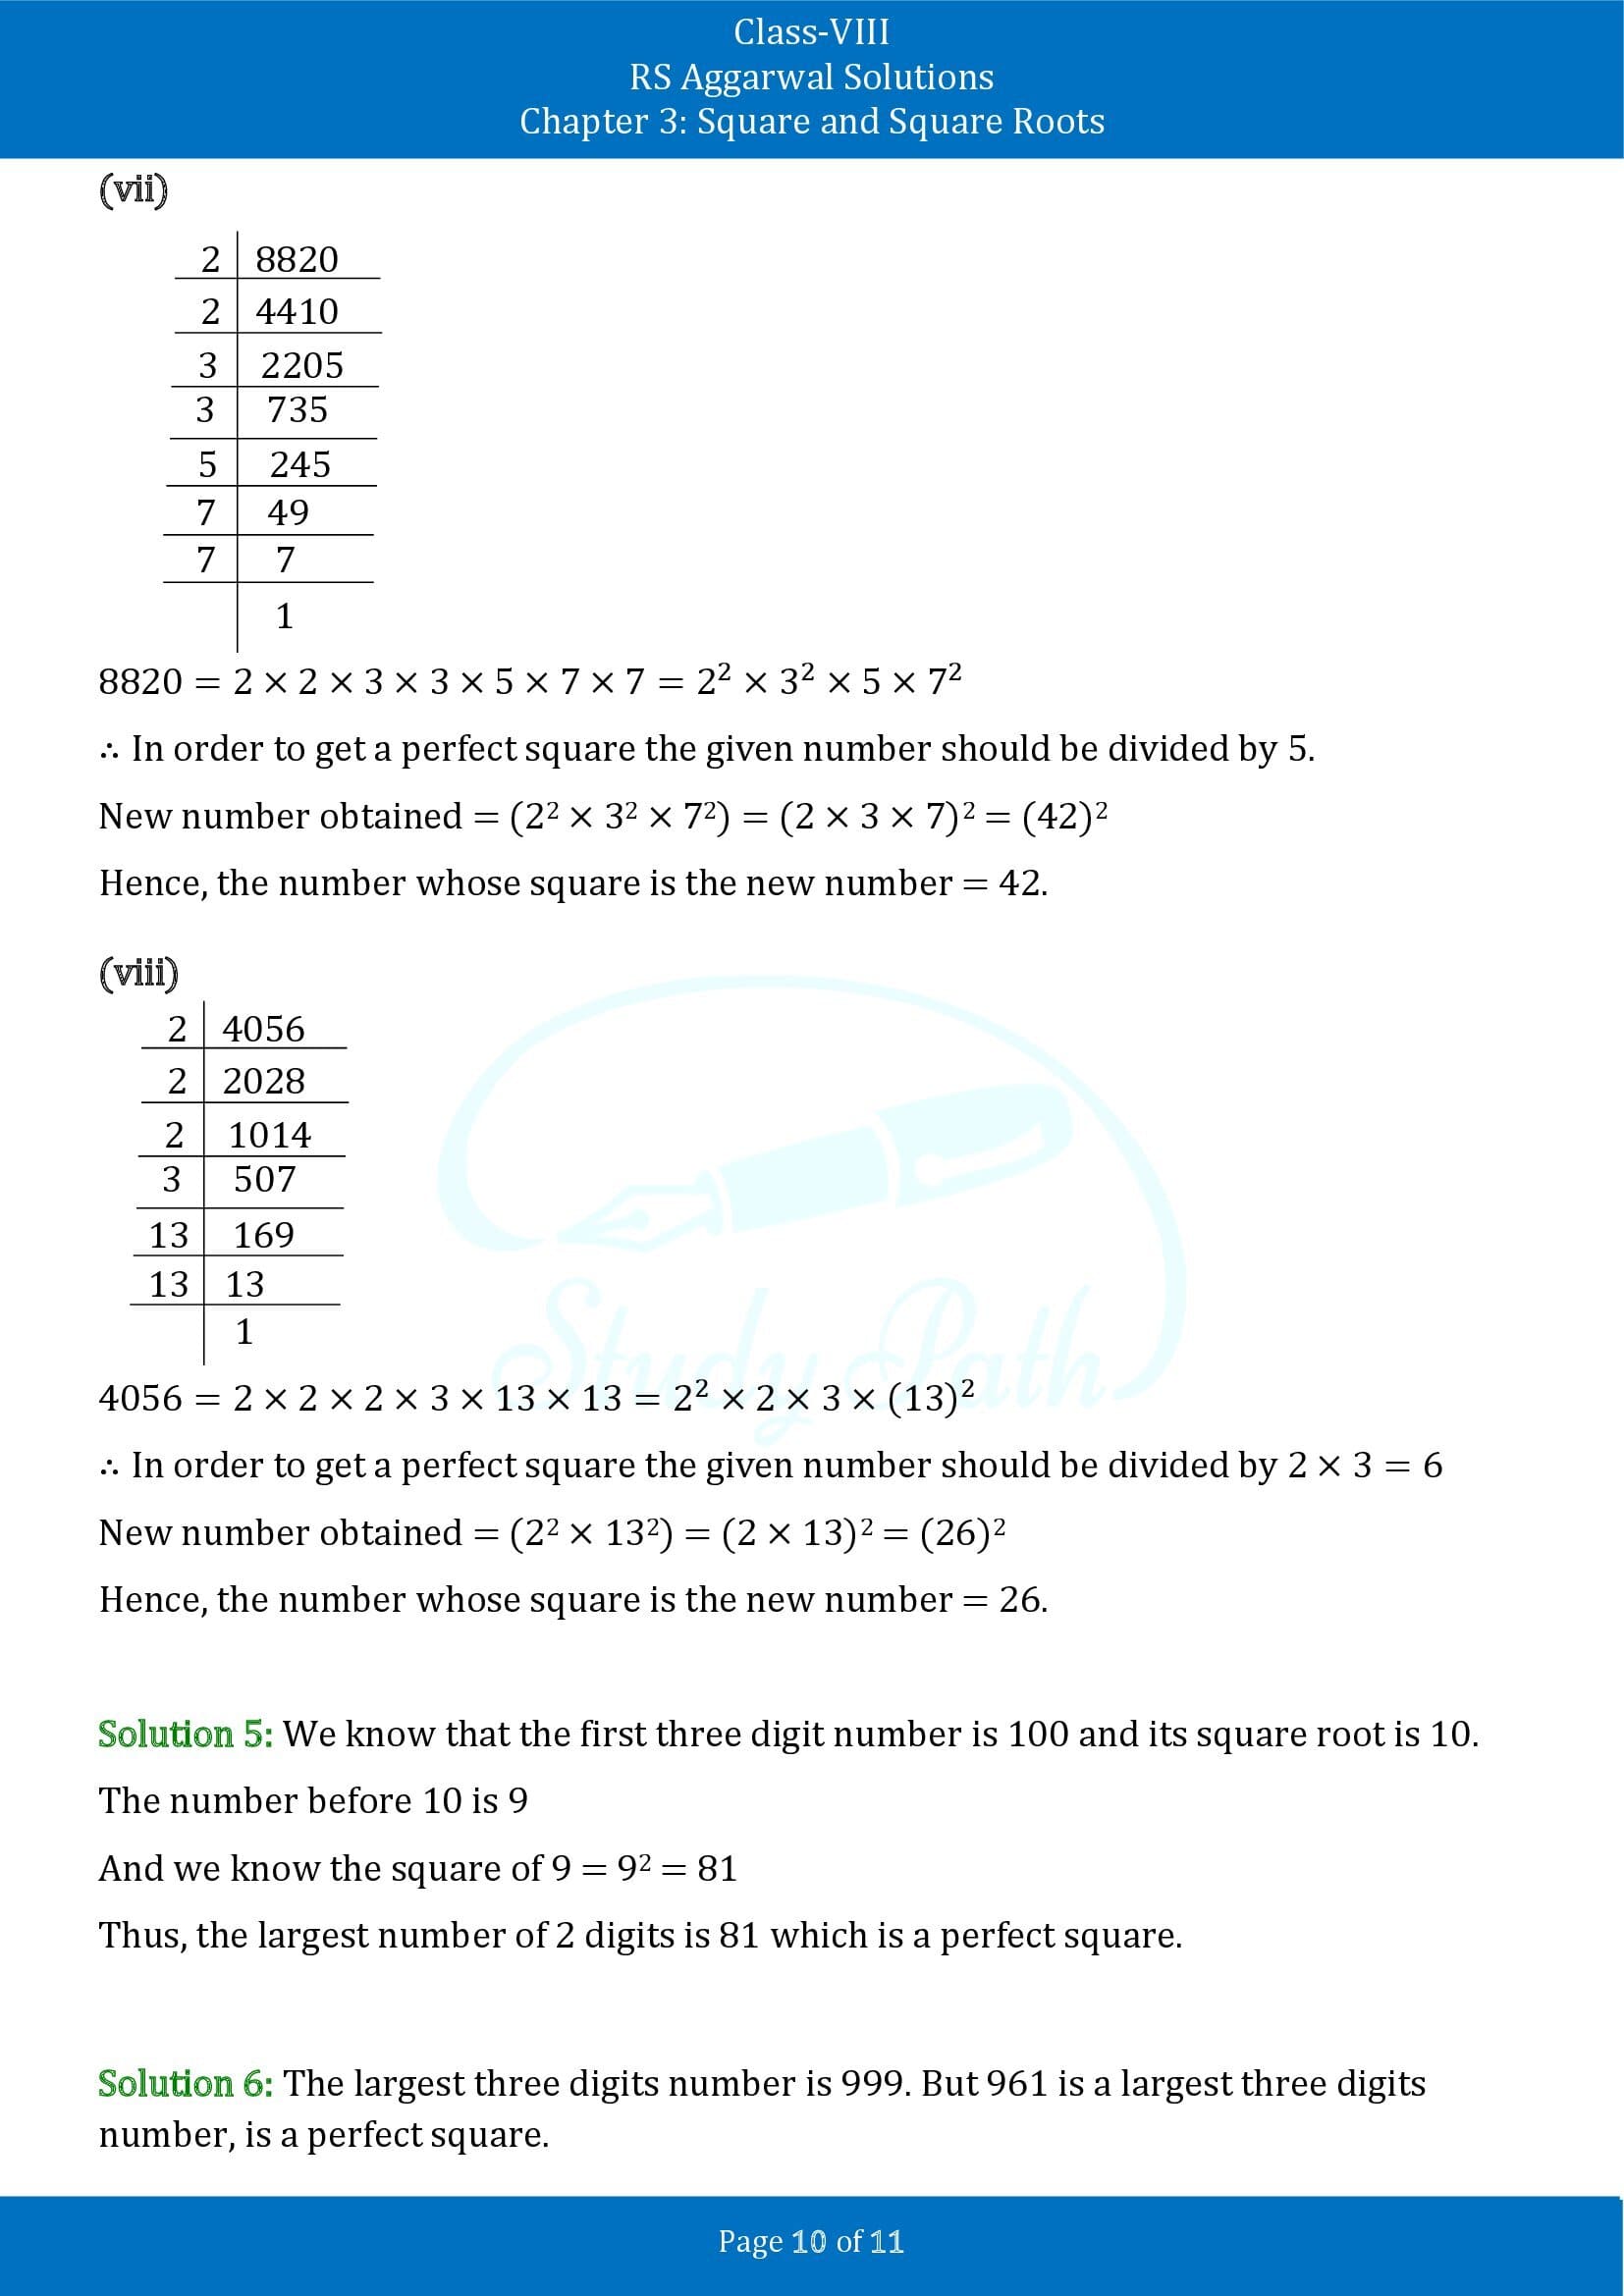 RS Aggarwal Solutions Class 8 Chapter 3 Square and Square Roots Exercise 3A 00010